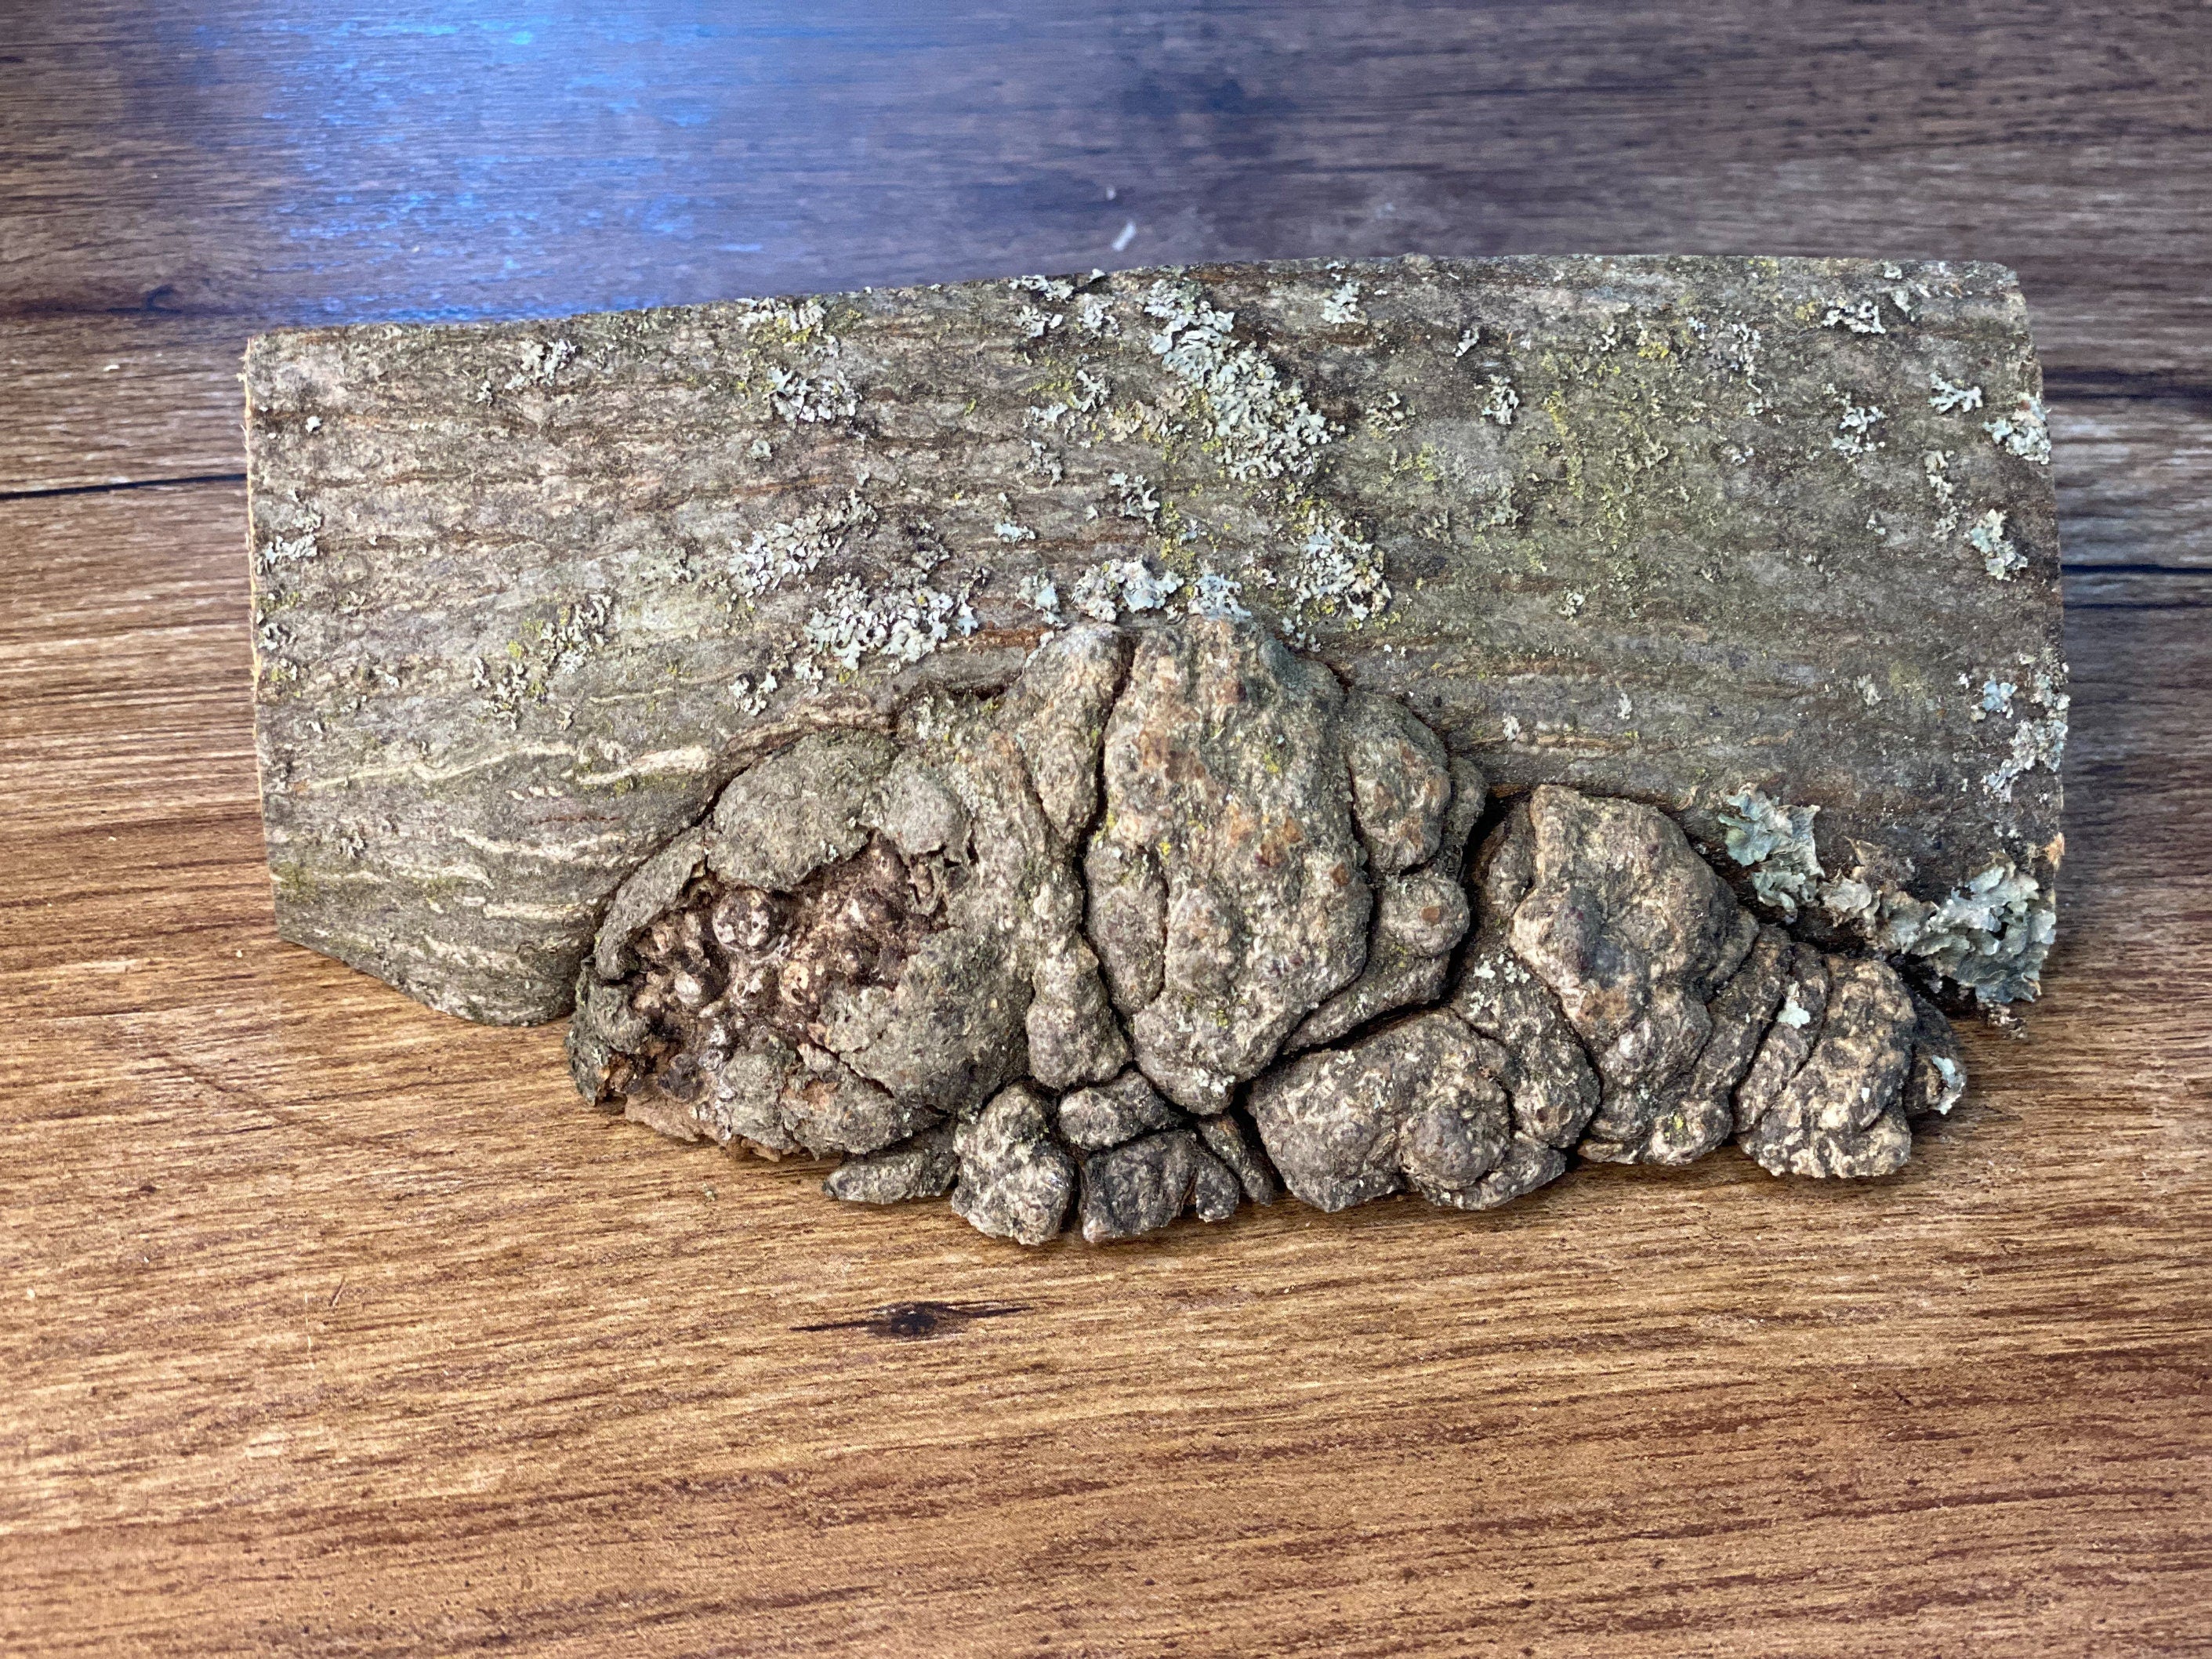 Quarter Piece Hickory Burl Log, 1 Count, Approximately 6.5 Inches Long by 2.5 Inches Wide and 2 Inches Tall